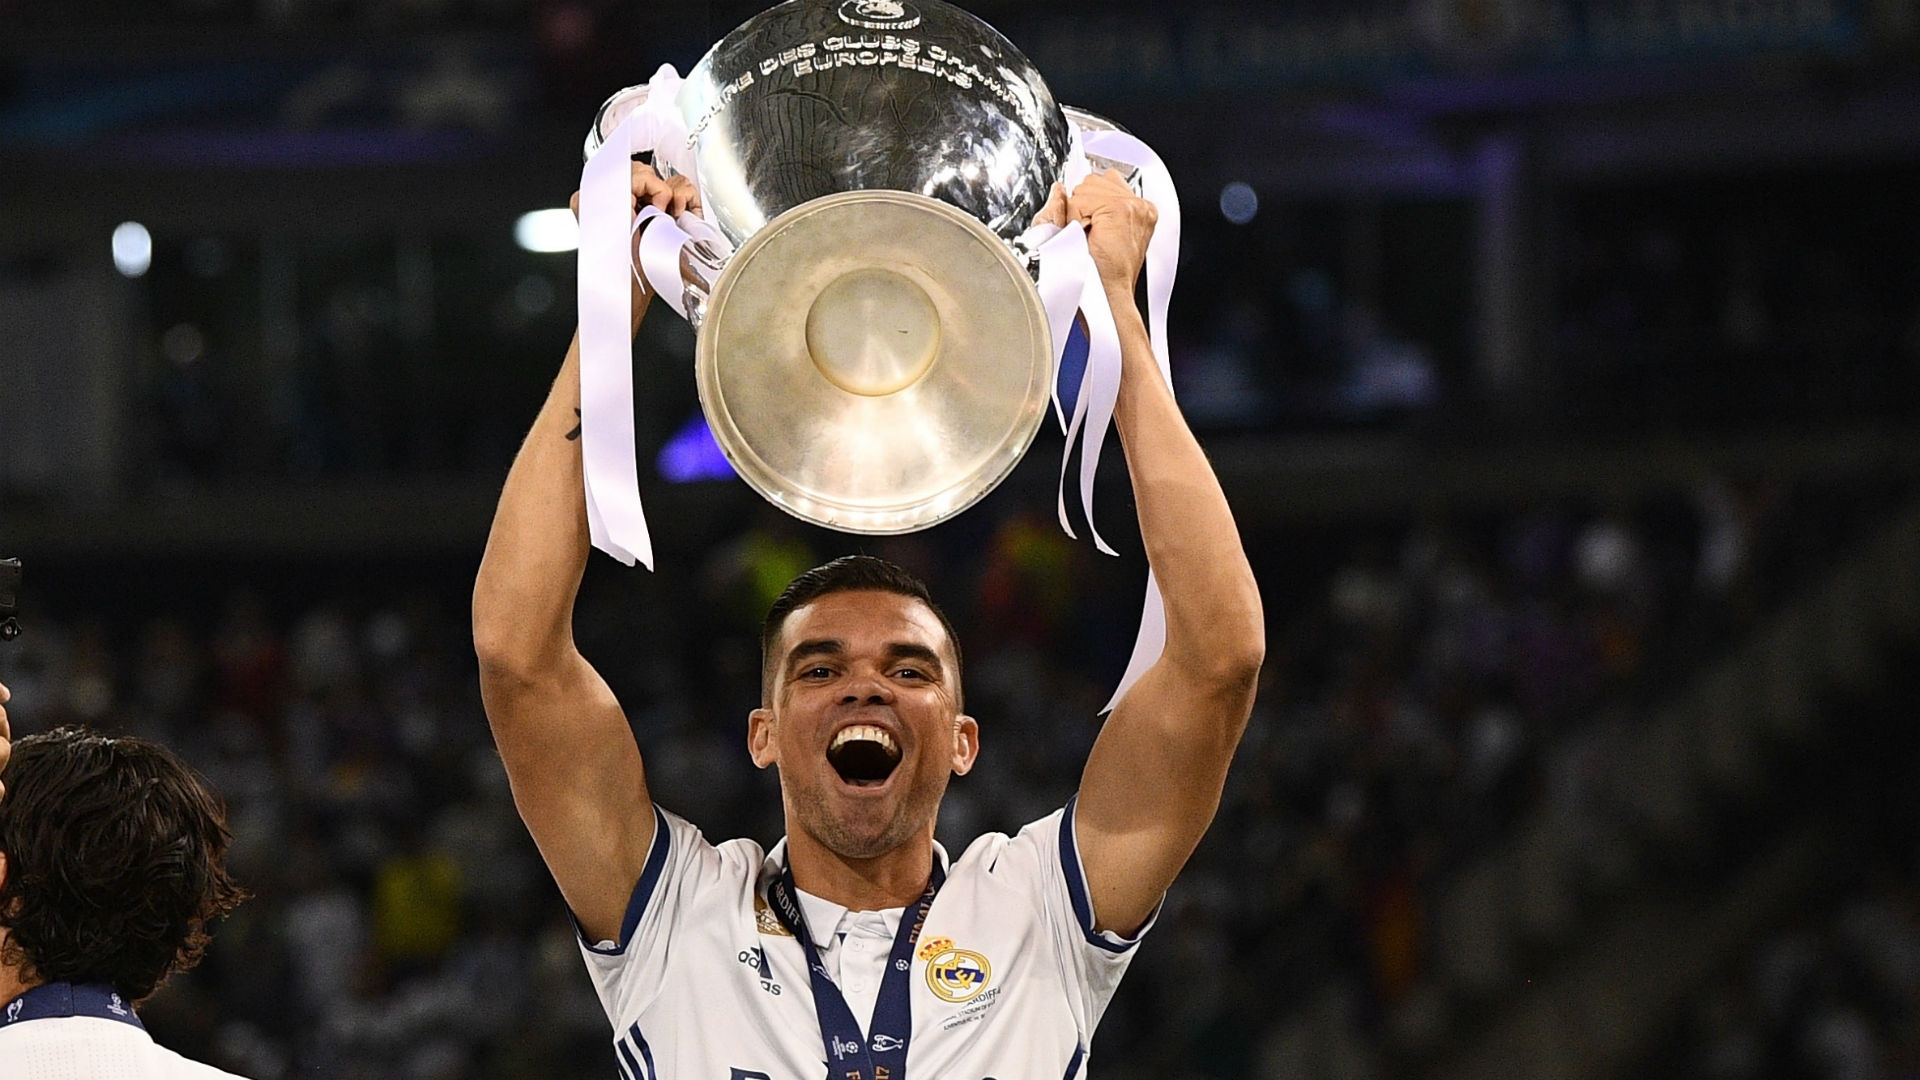 Pepe ends a highly successful ten year career at Real, with the player having won both the Champions League and La Liga trophies, each on three separate occasions.